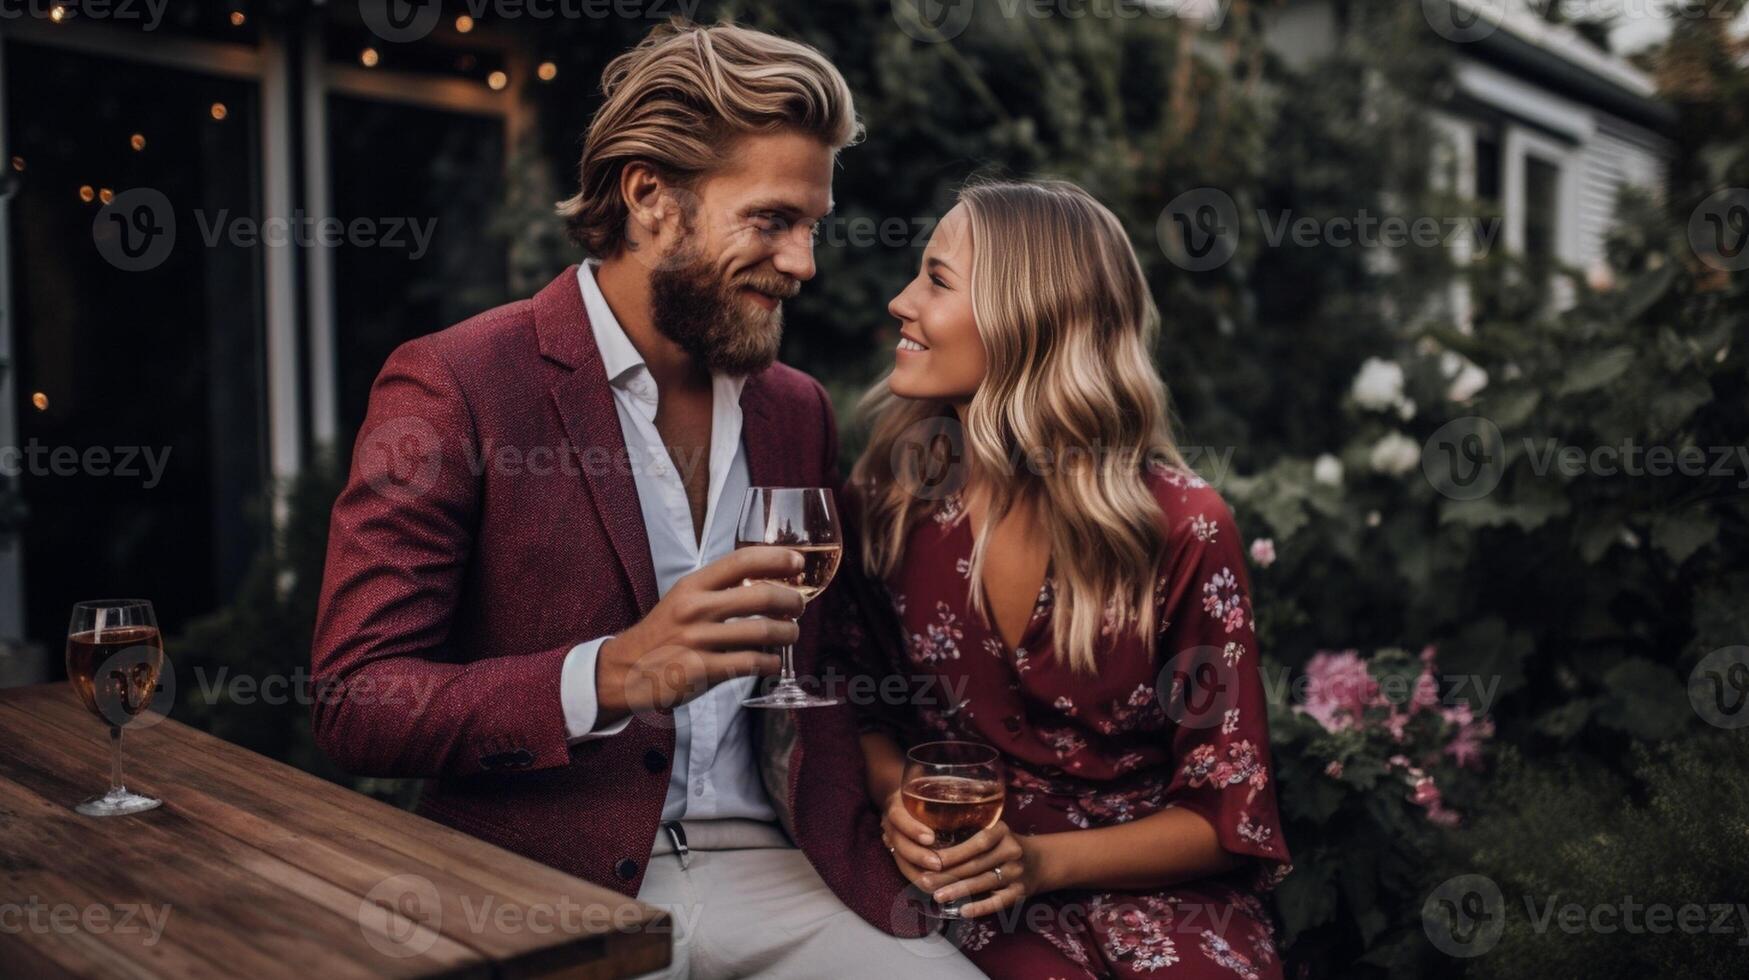 AI Generative Young couple in love on a date having fun drinking red wine in farmhouse garden  Multiracial boyfriend and girlfriend enjoying wine tasting weekend experience at restaurant patio photo